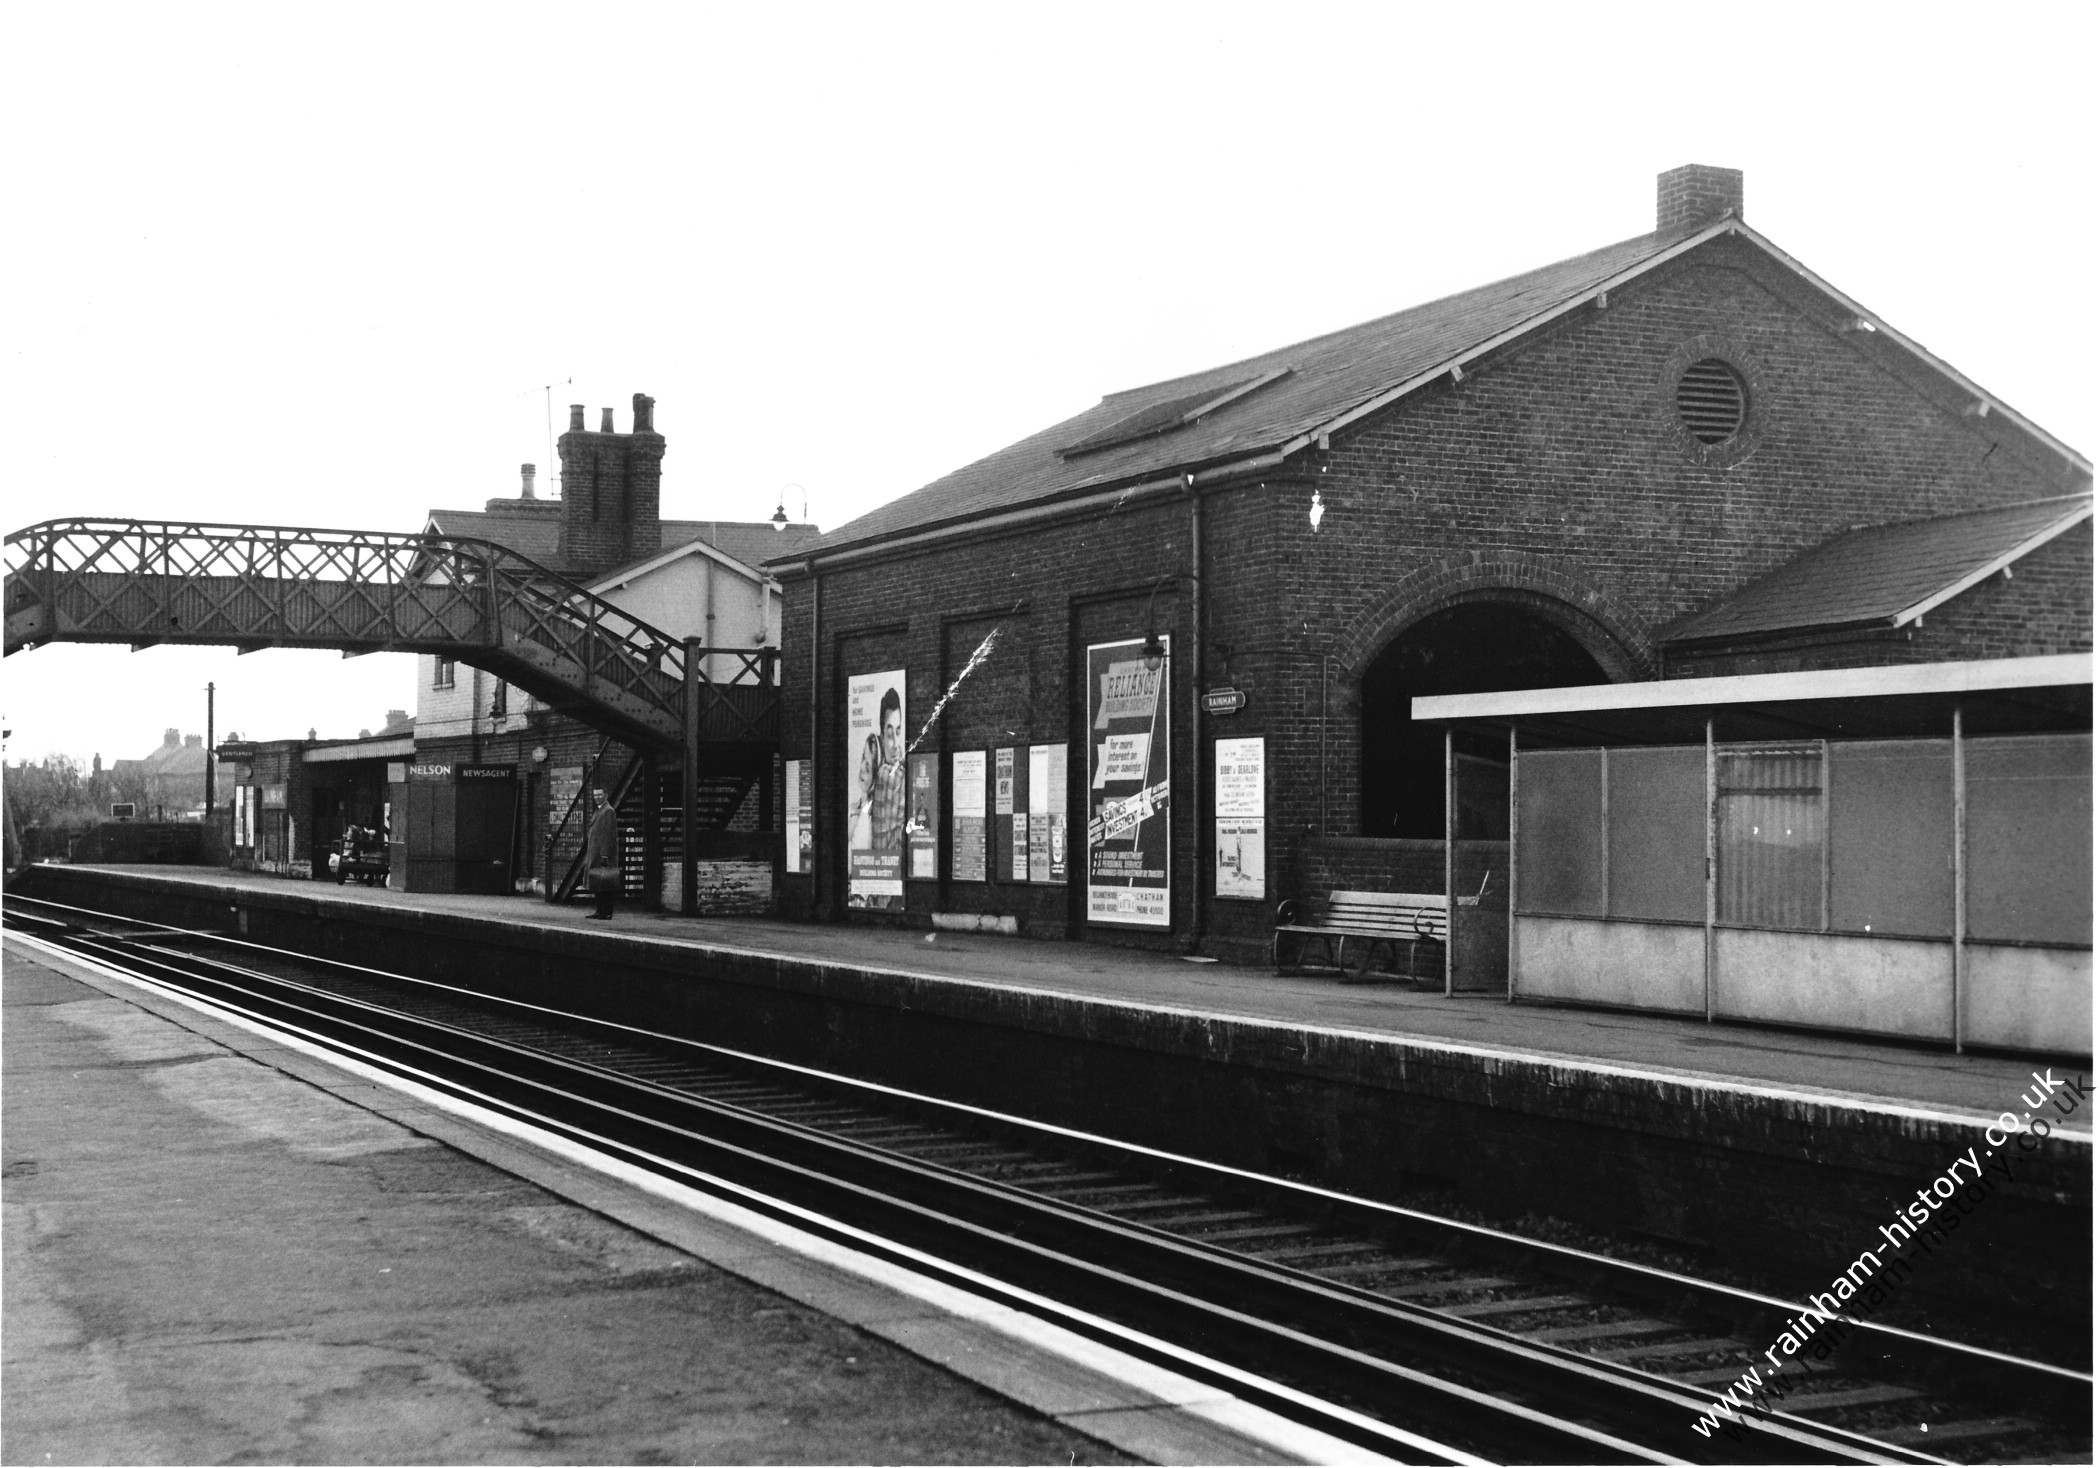 view of the Station buildings from the coastbound platform with the footbridge over the tracks and a passenger waiting on the platform. There is a poster for Chatham Reliance Building Society.